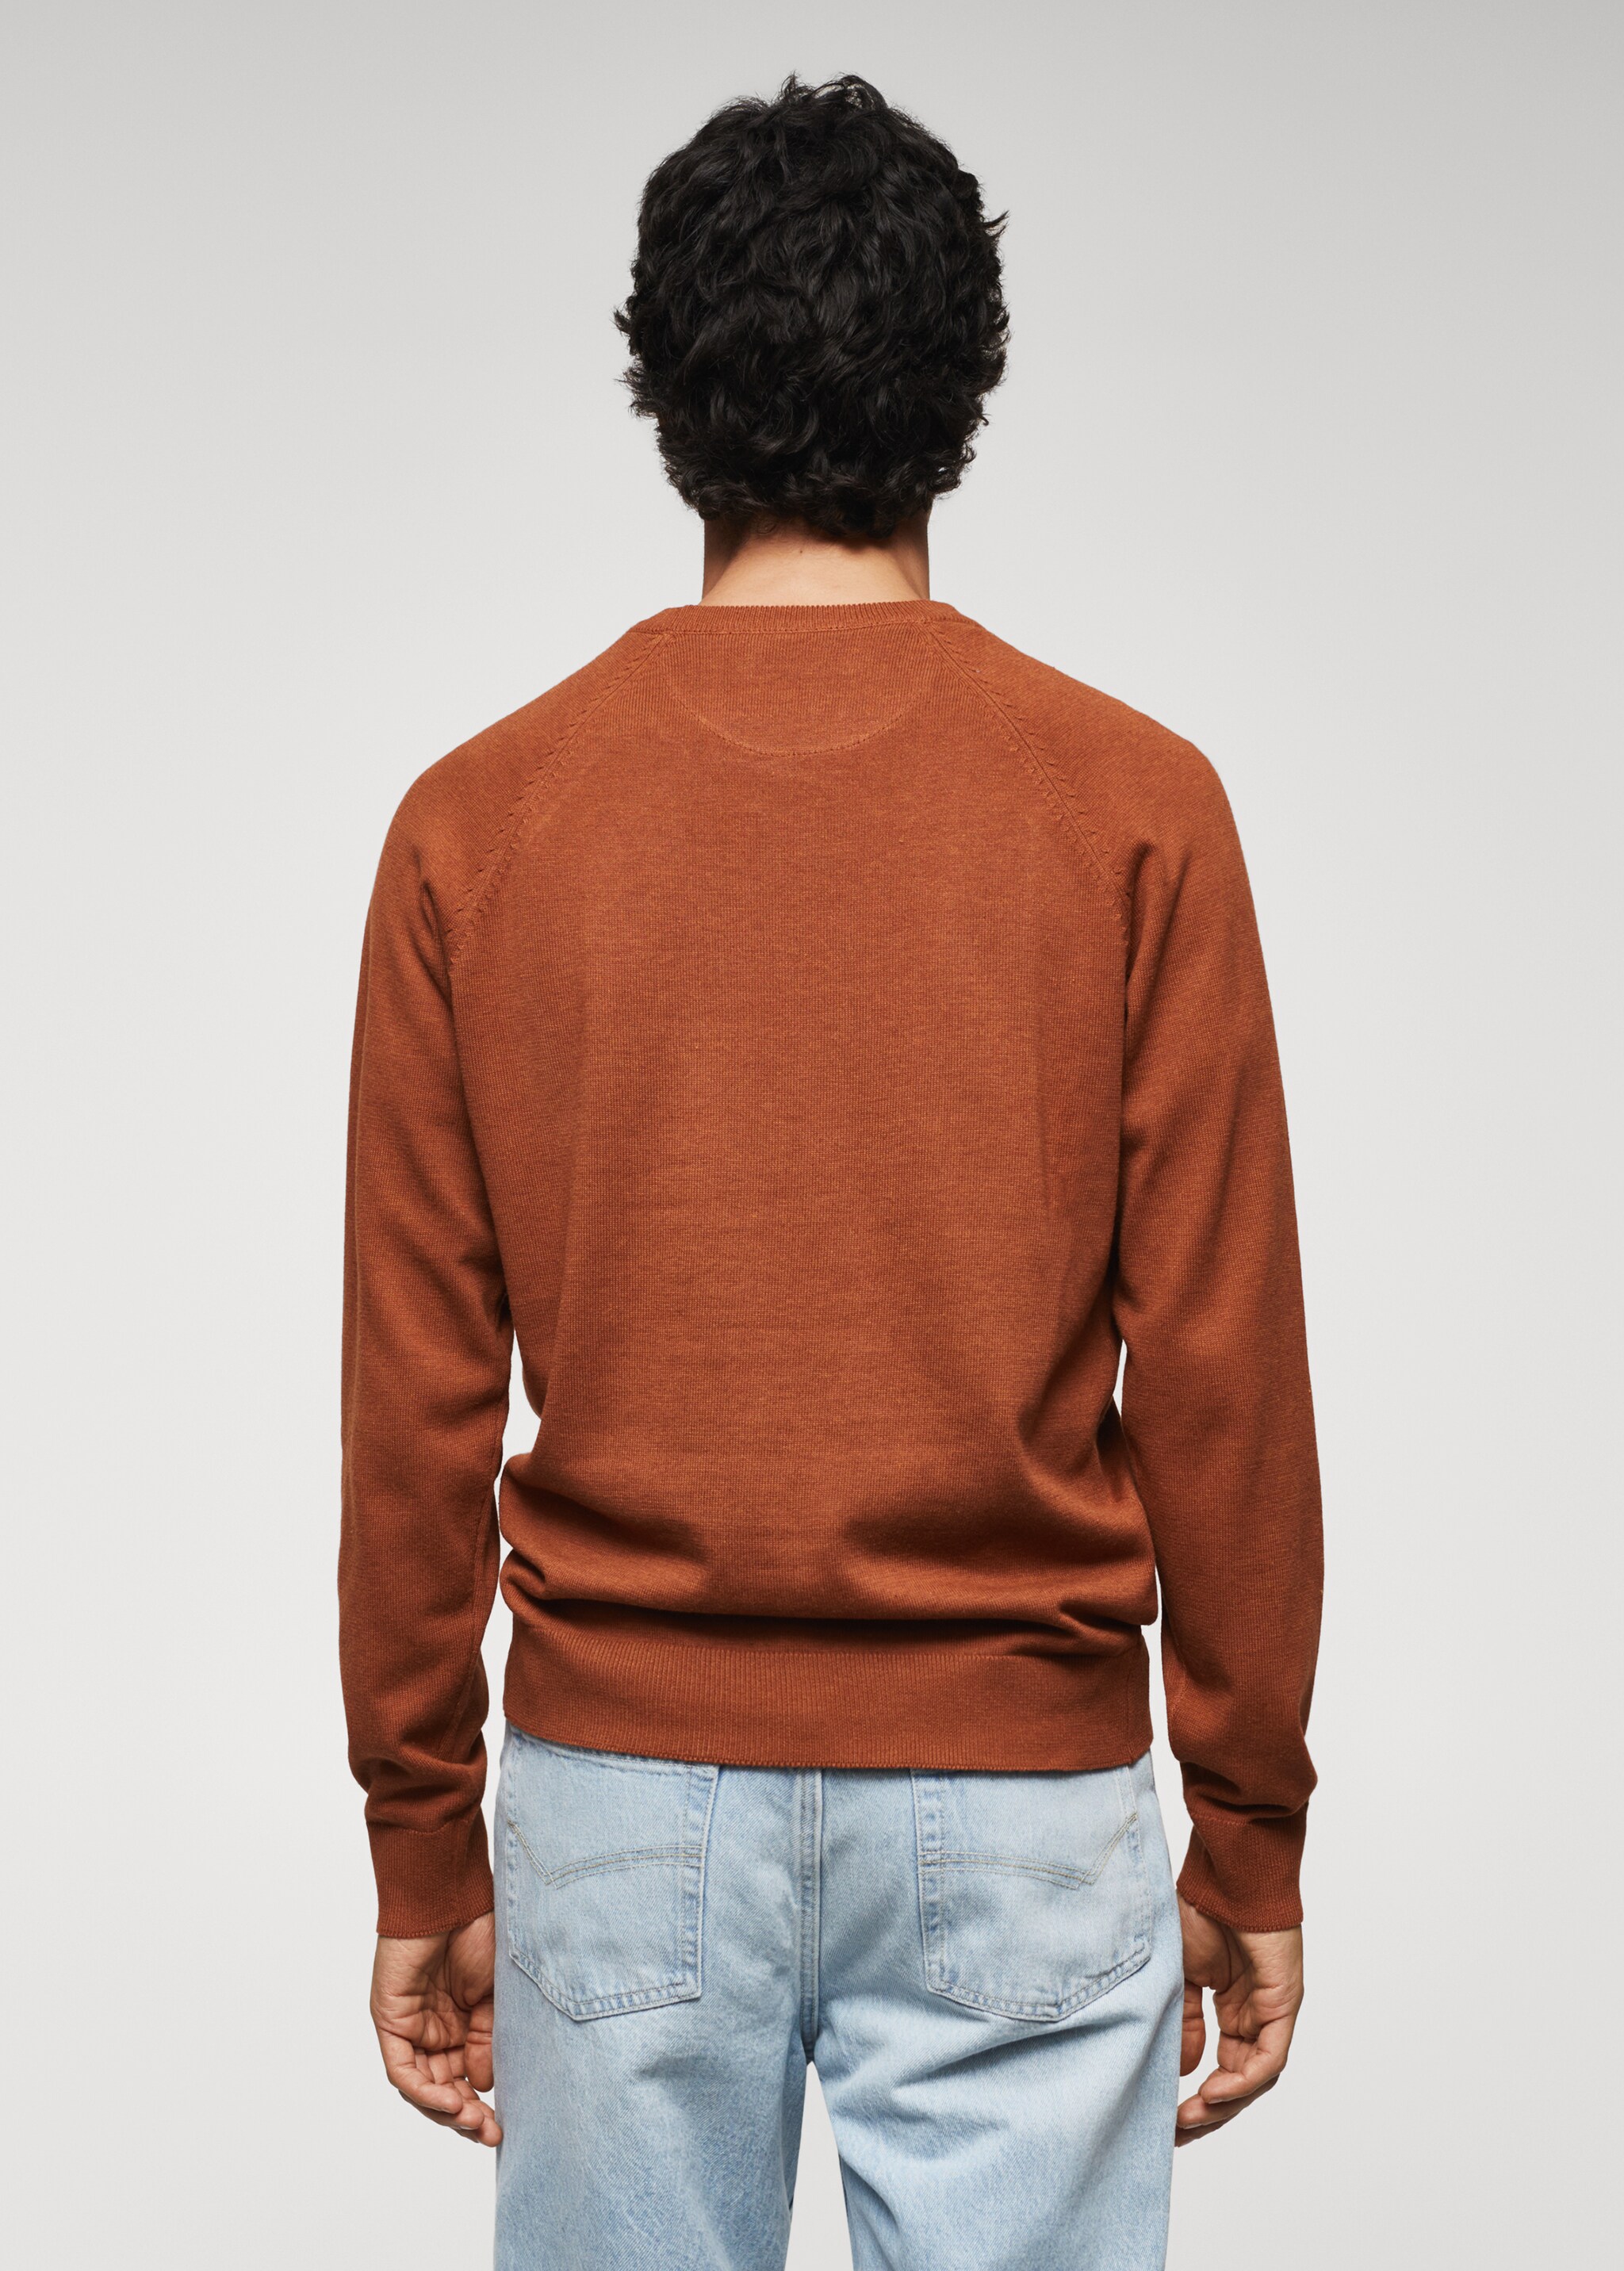 Fine-knit cotton sweater - Reverse of the article